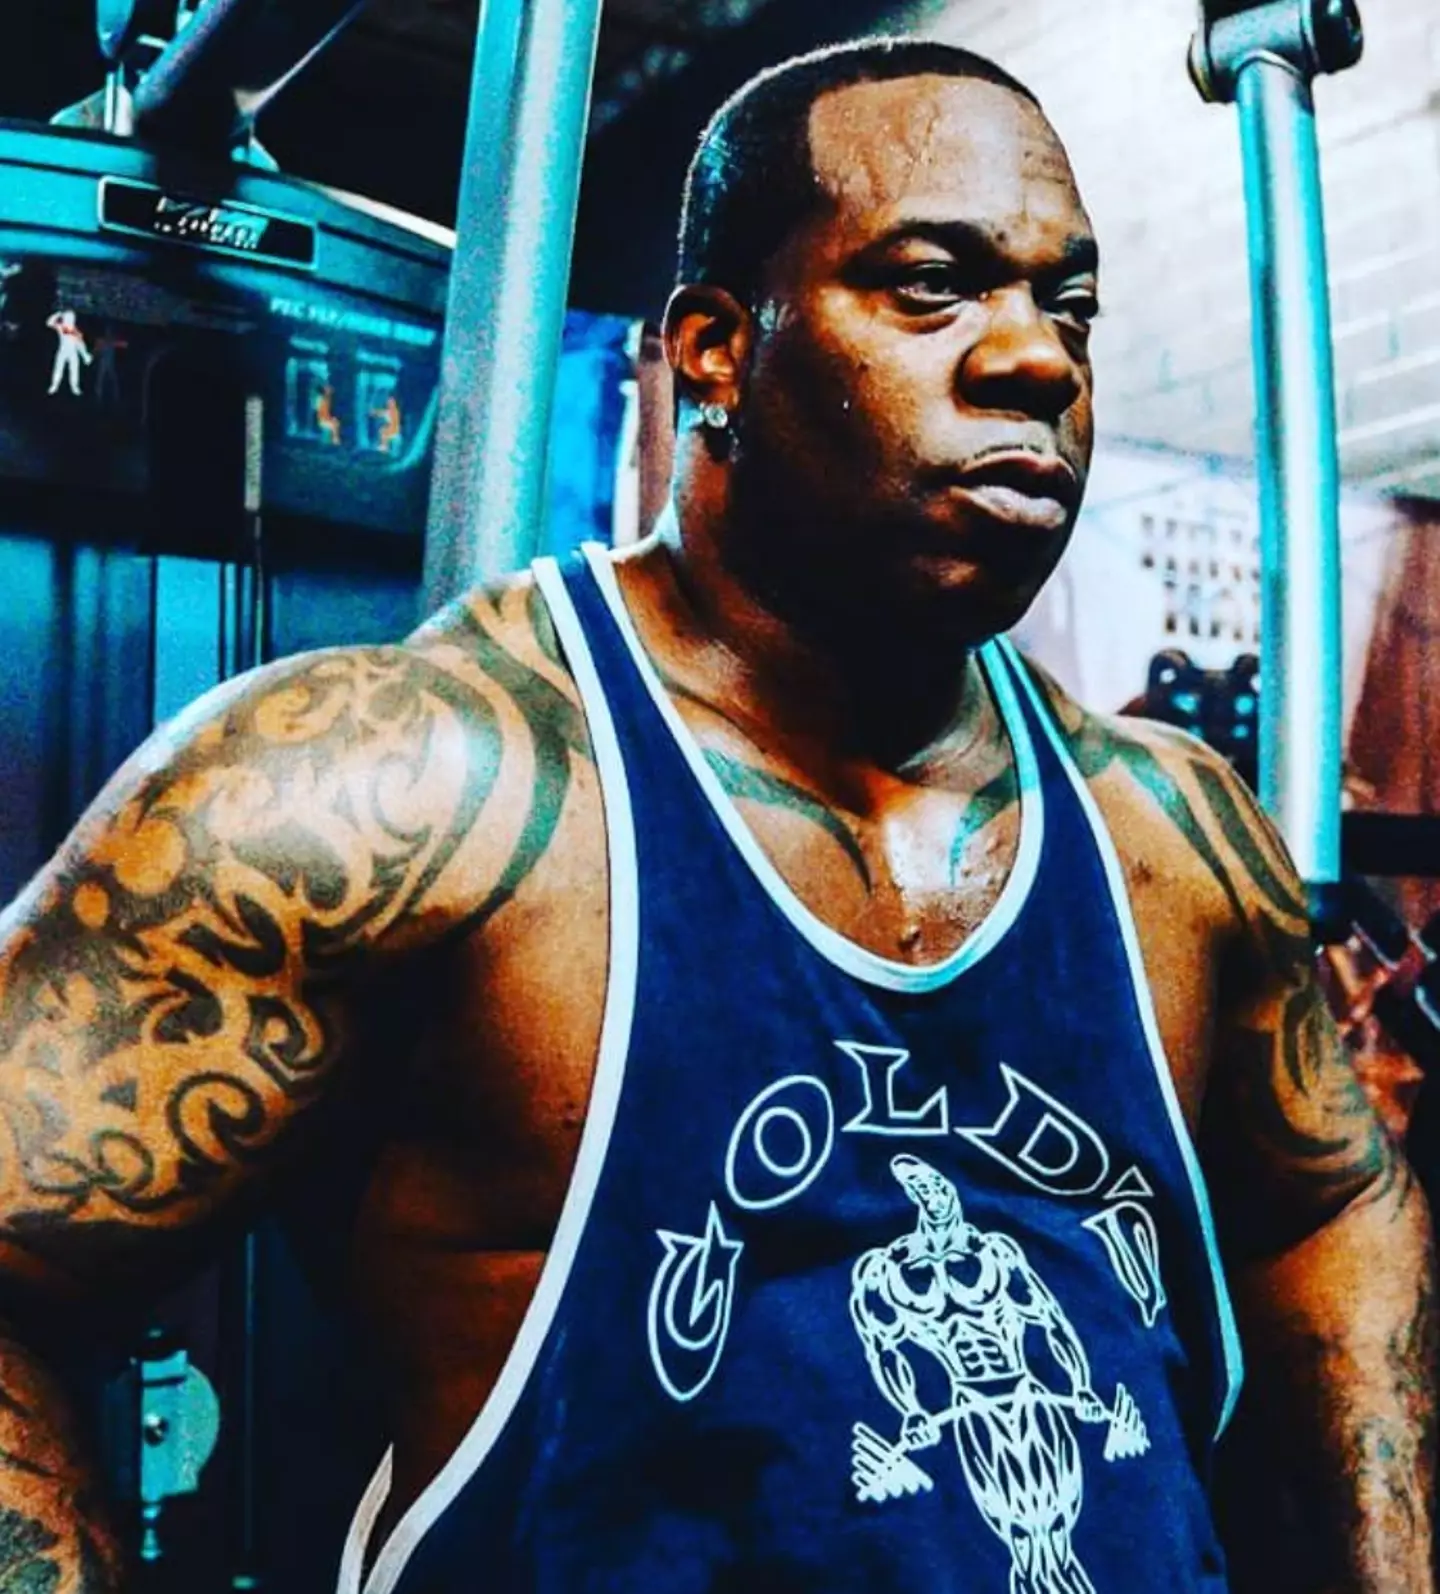 Rapper Busta Rhymes has lost 100lbs, since overhauling his lifestyle.